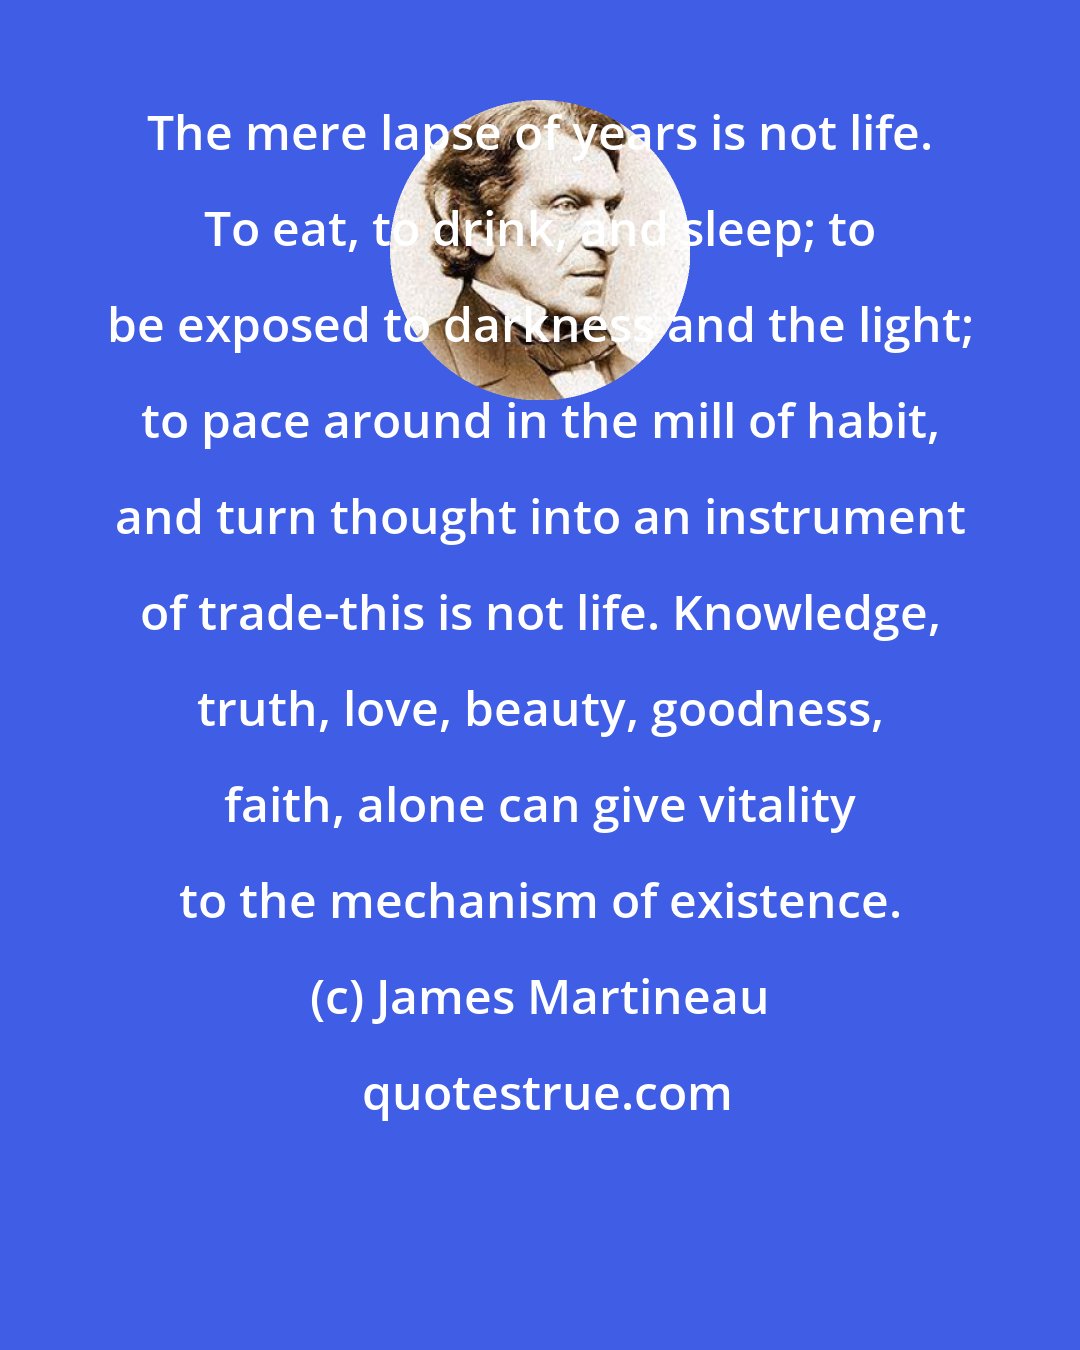 James Martineau: The mere lapse of years is not life. To eat, to drink, and sleep; to be exposed to darkness and the light; to pace around in the mill of habit, and turn thought into an instrument of trade-this is not life. Knowledge, truth, love, beauty, goodness, faith, alone can give vitality to the mechanism of existence.